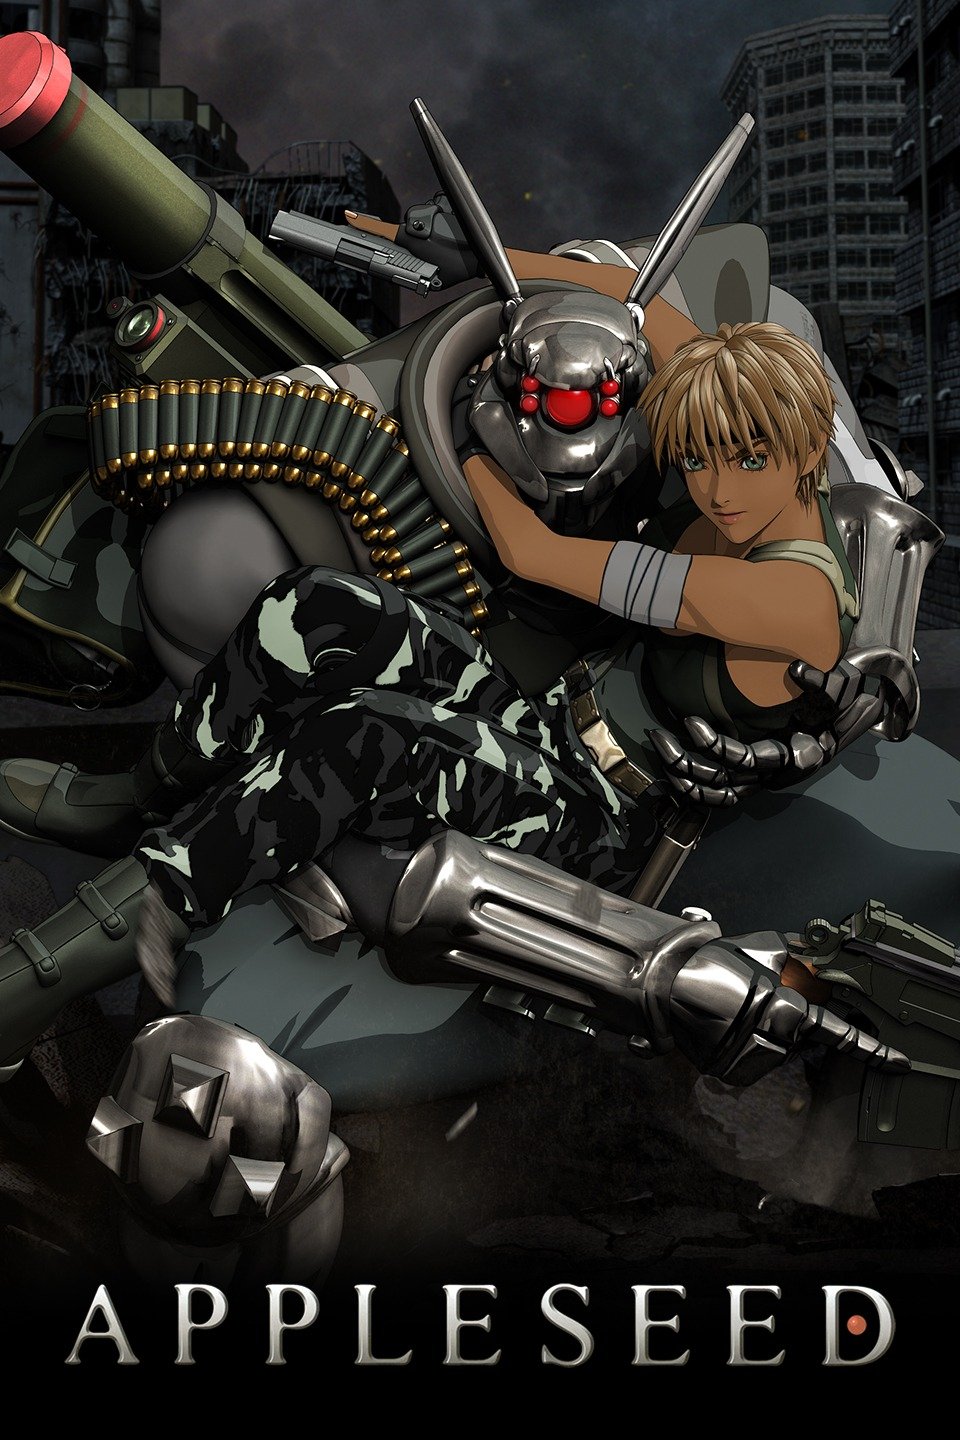 appleseed movie review